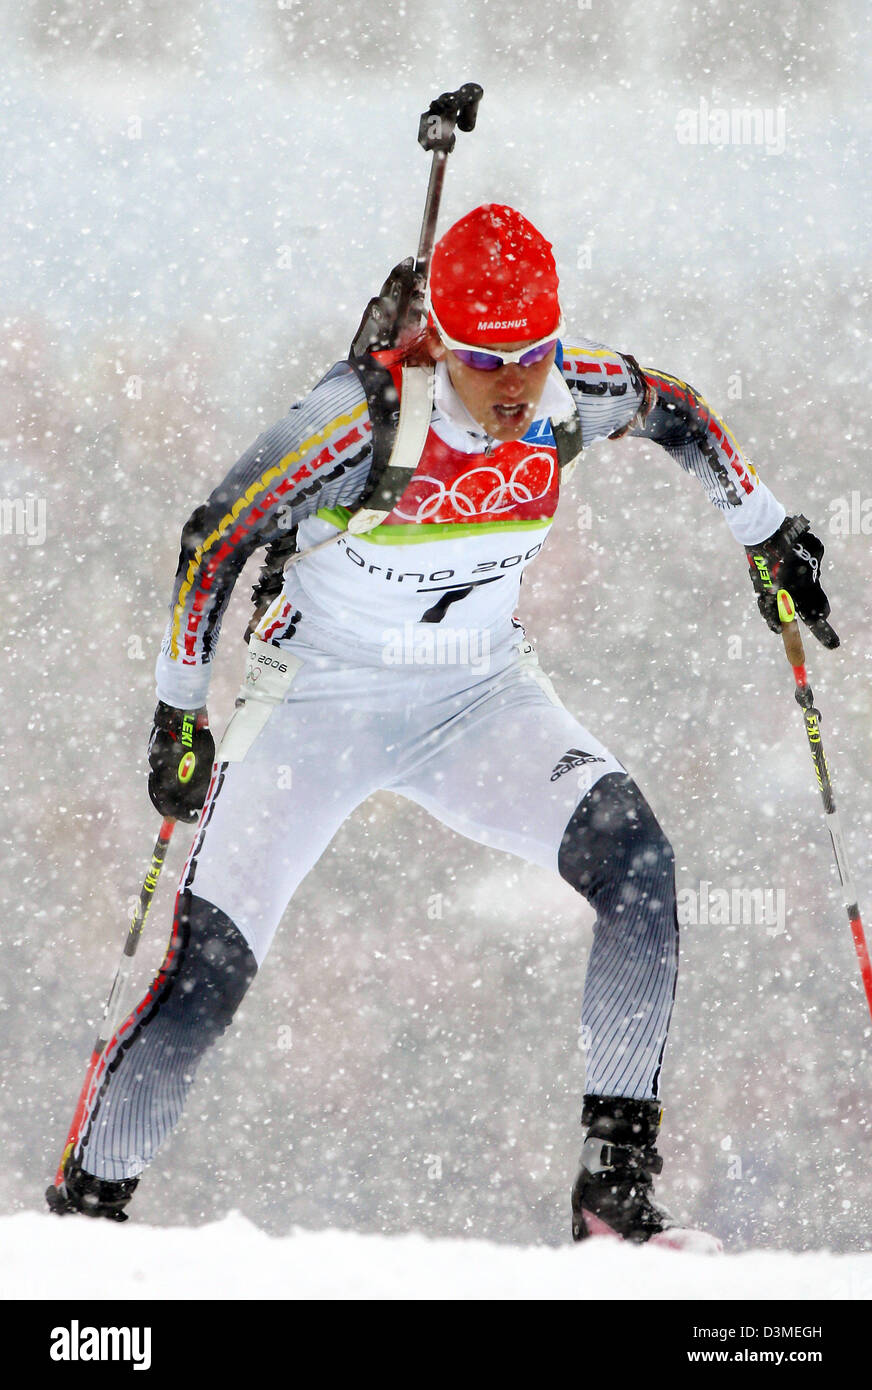 (dpa) - German biathlete Kati Wilhelm photographed while it snows during the women's 10km pursuit race at the Olympic track in San Sicario, Italy, Saturday 18 February 2006. Wilhelm won gold. Photo: Bernd Thissen Stock Photo